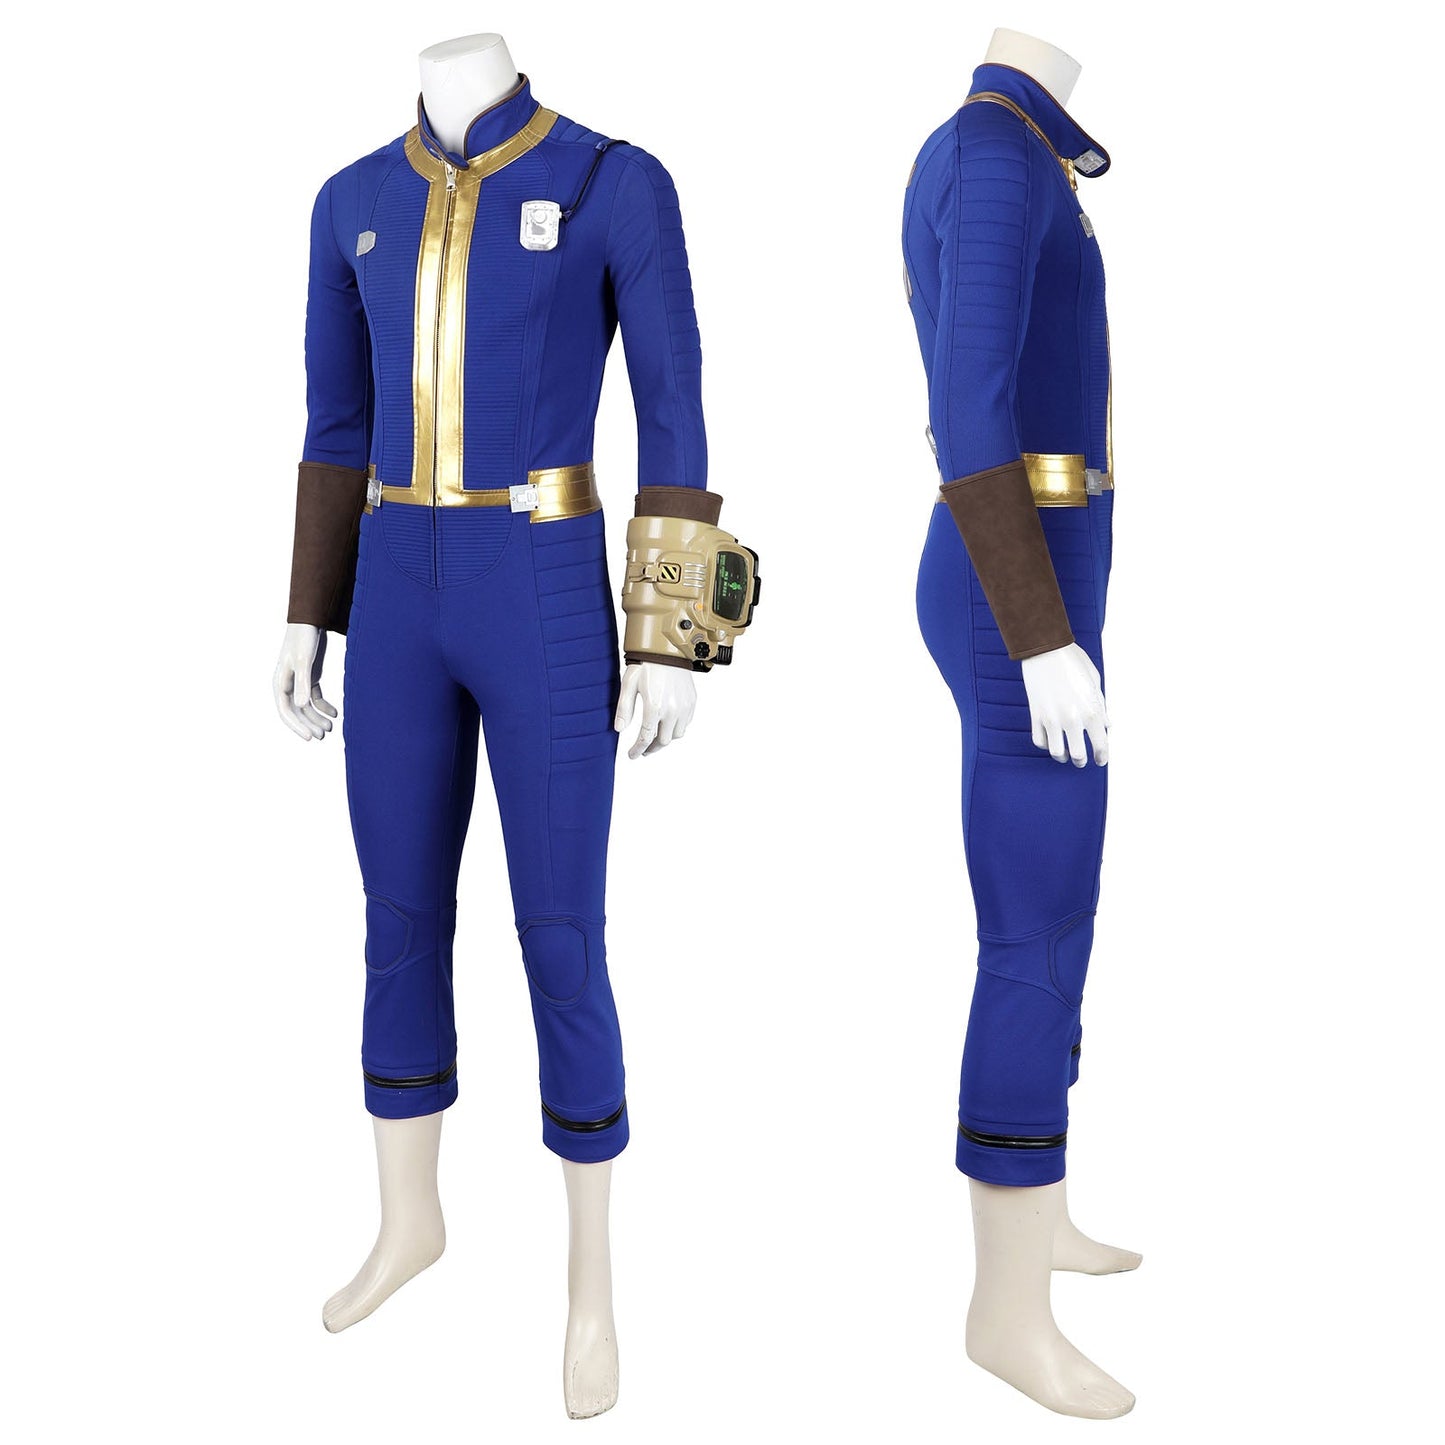 Game Fallout 4 Vault No. 75 Sheltersuit Male Full Set Cosplay Costumes